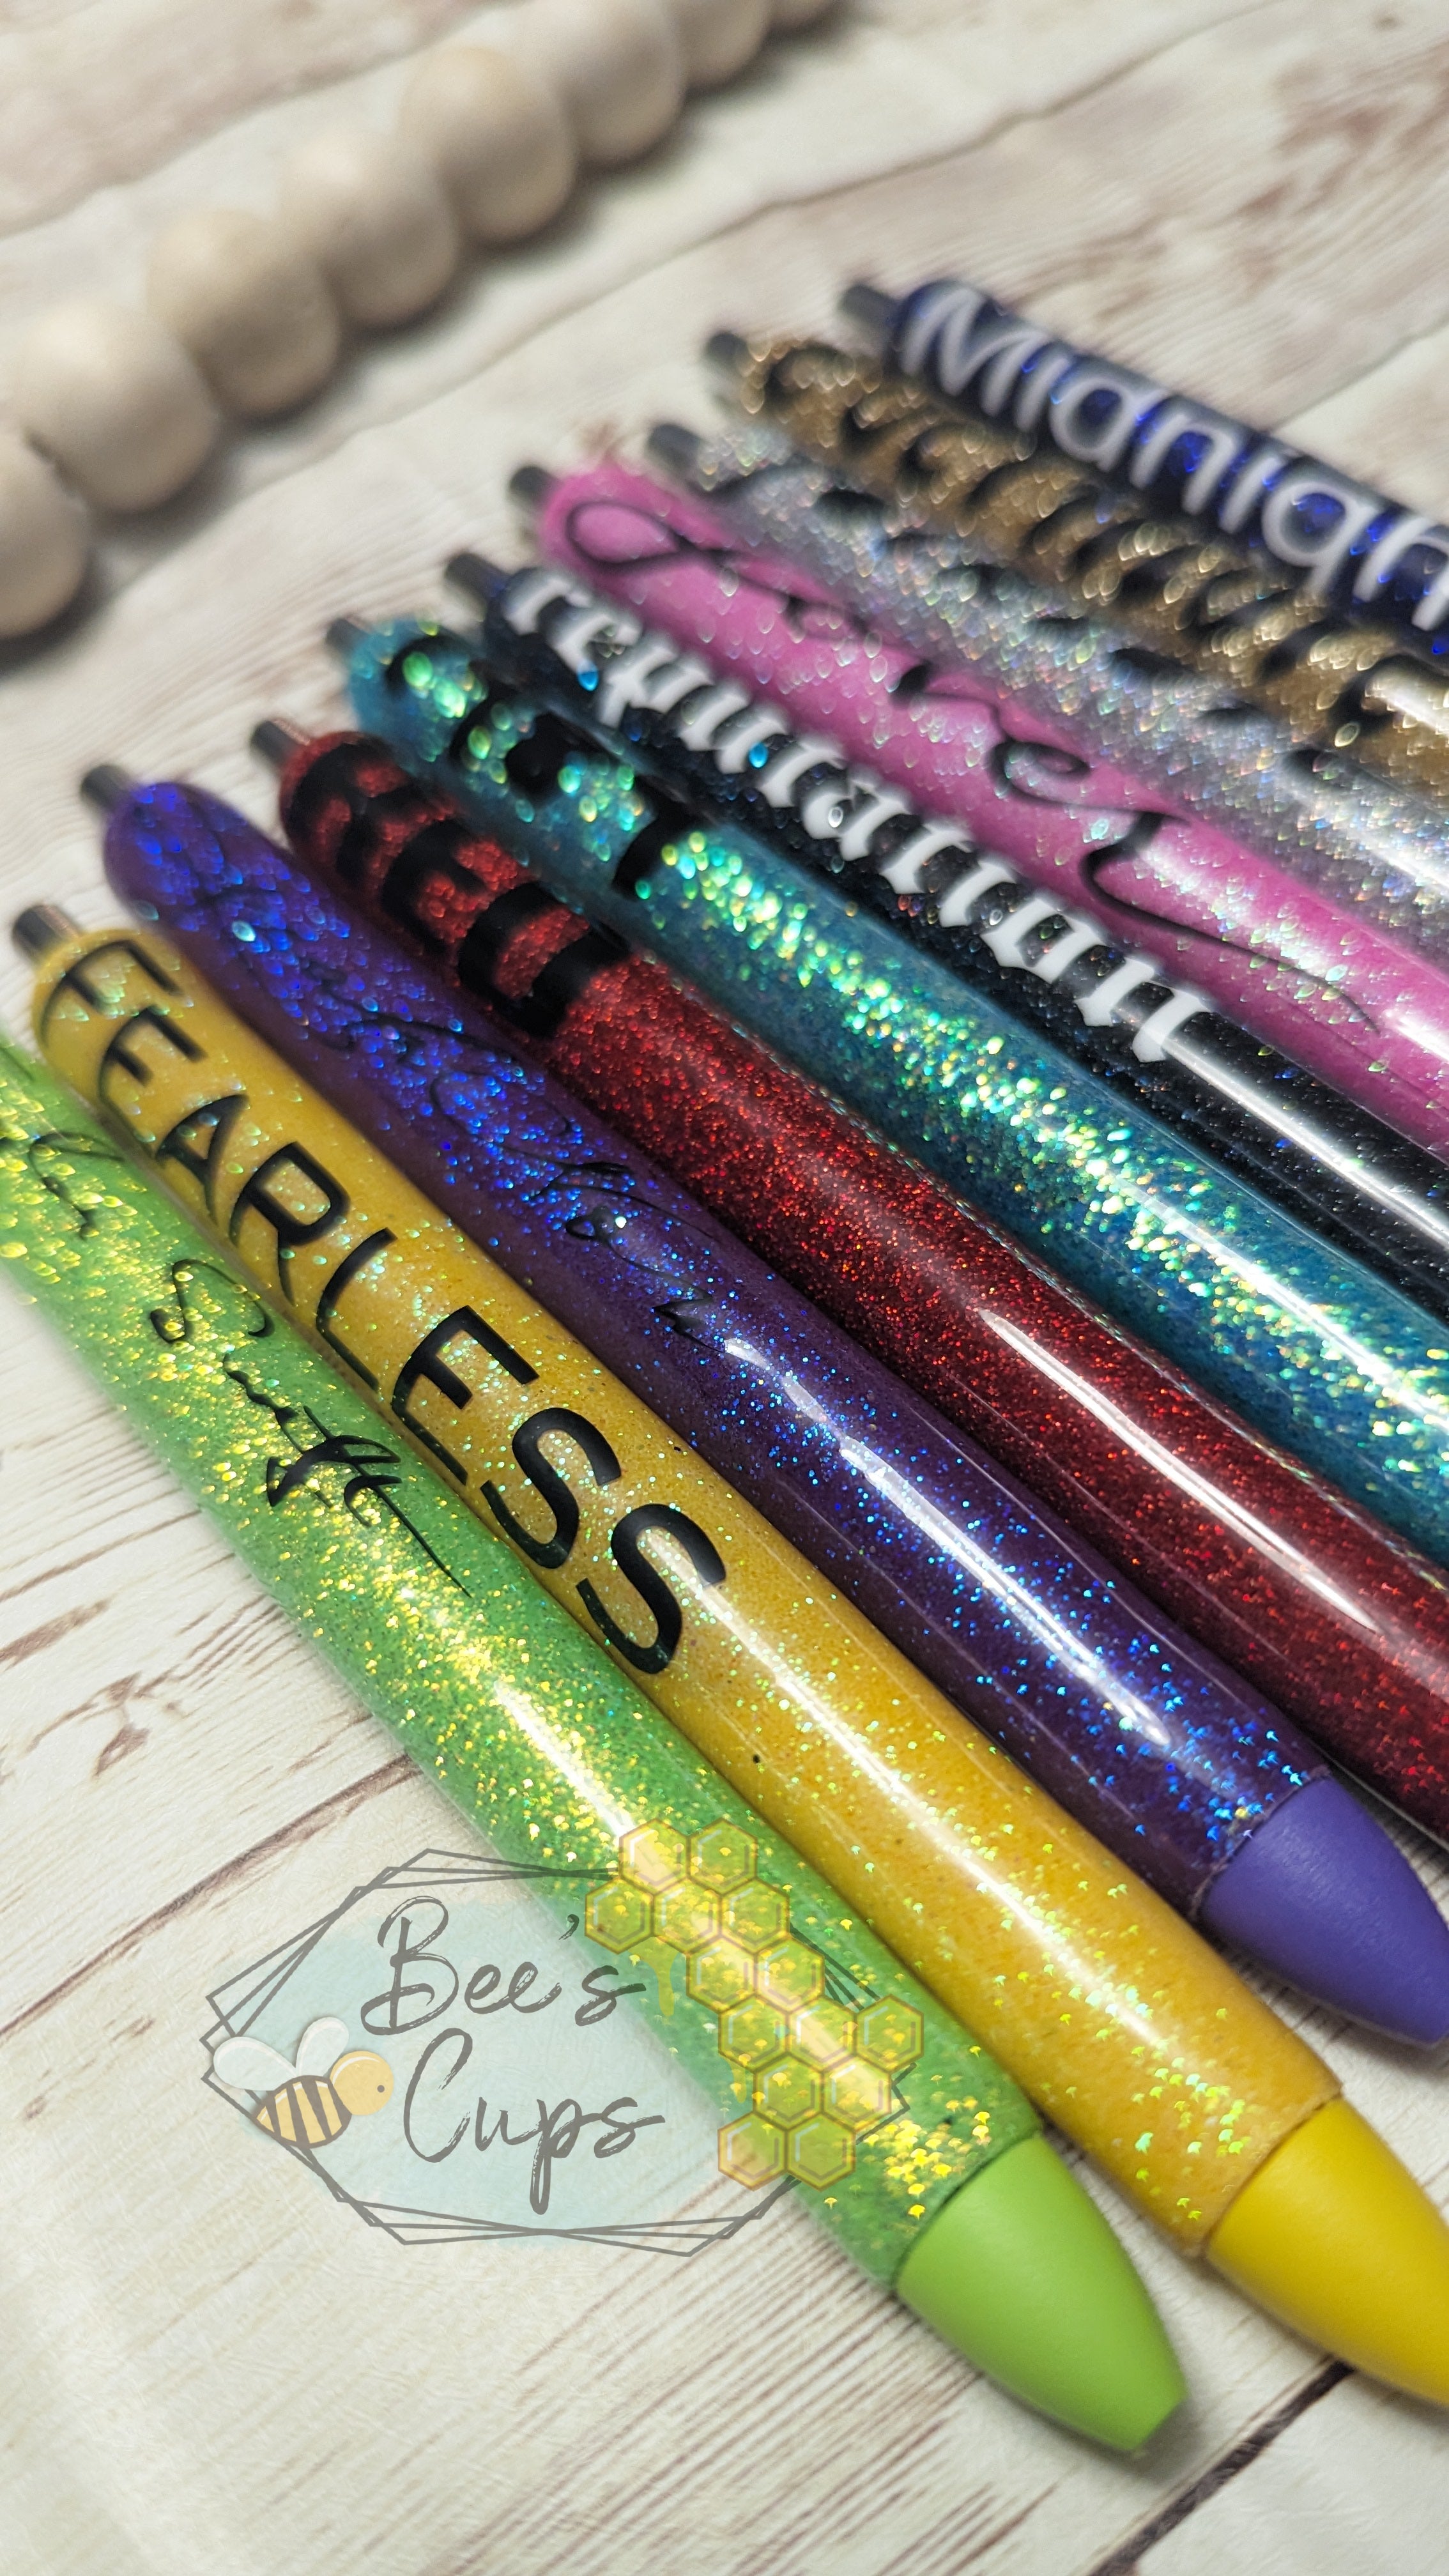 Adult day of the week glitter pens